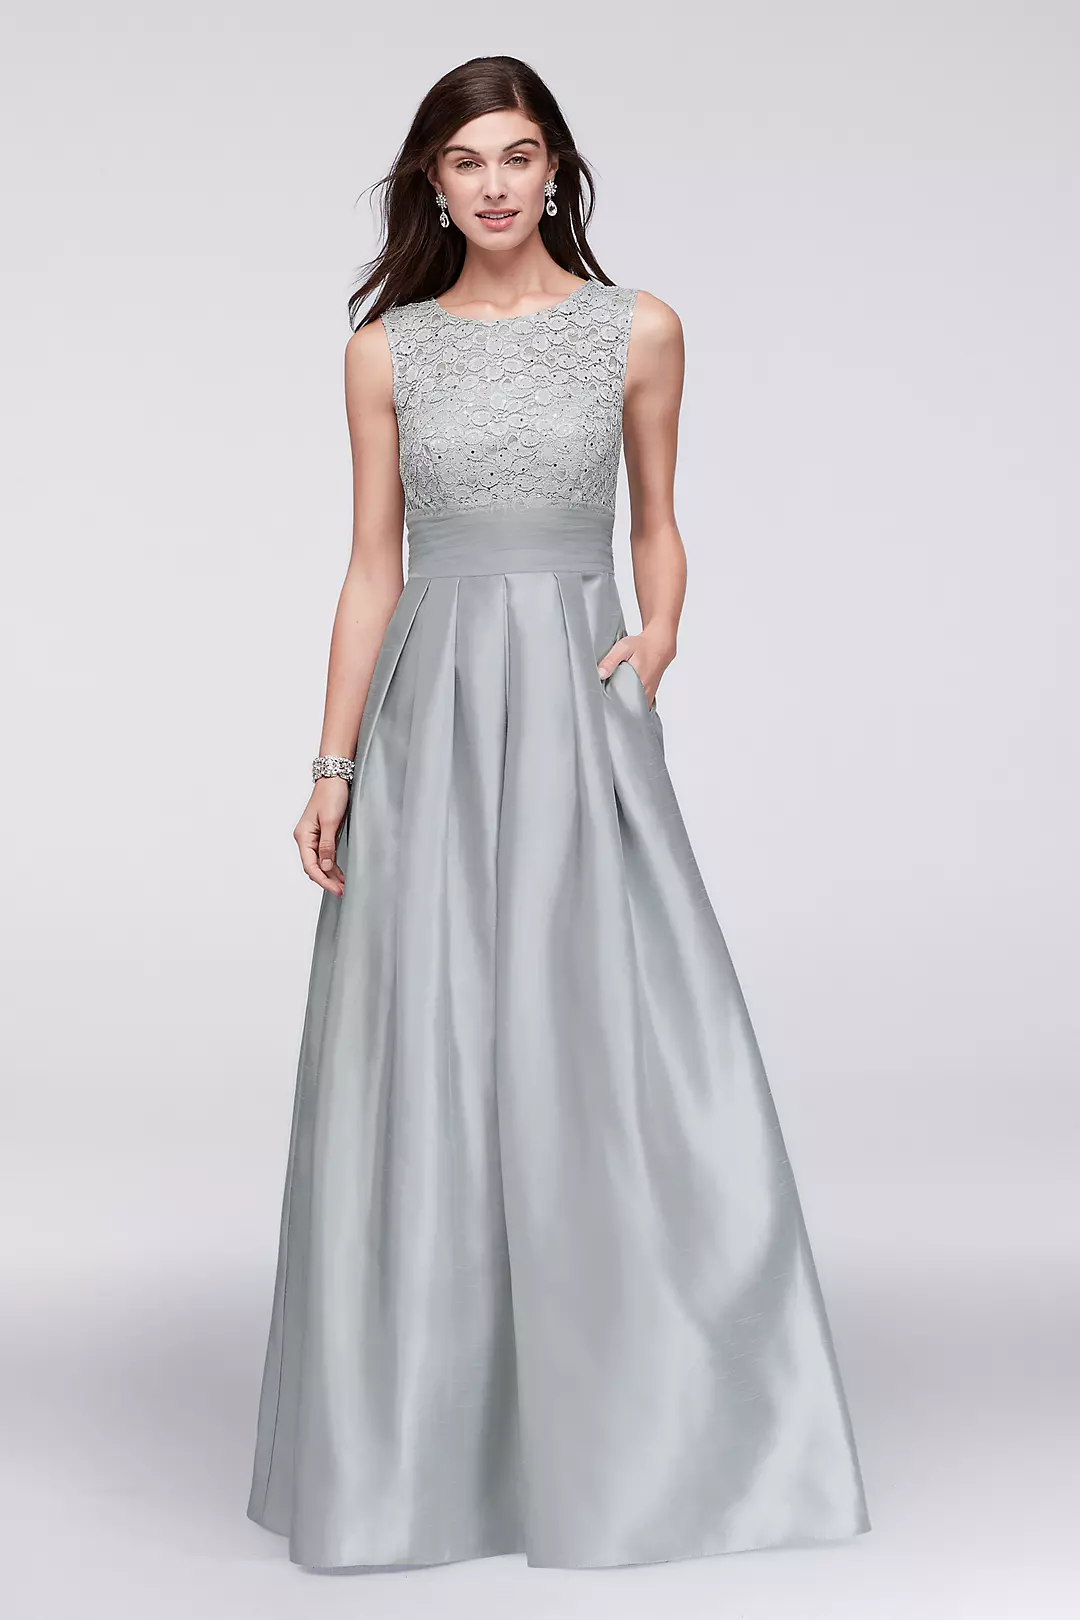 Lace and Satin Sleeveless Ball Gown Image